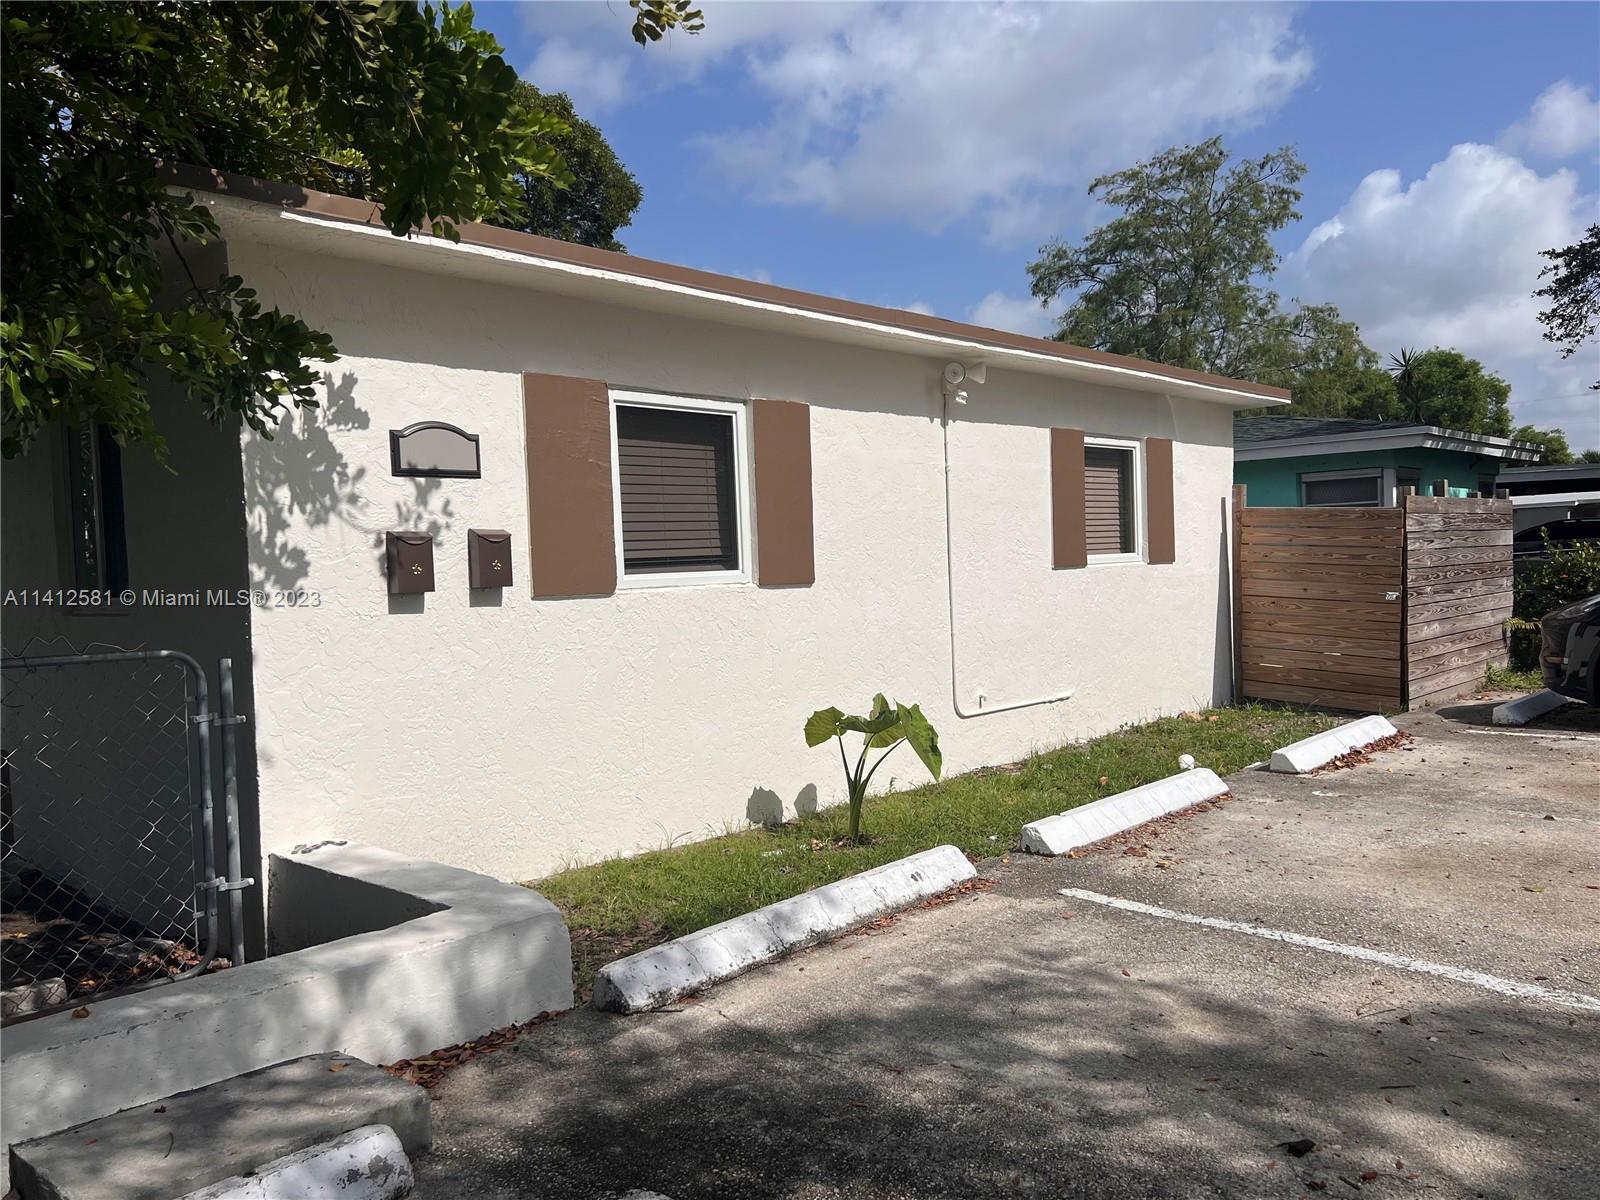 Fully remodeled Duplex east of I-95, off Sunrise Blvd. Each unit is a 2/1 and both have NEW: Impact 